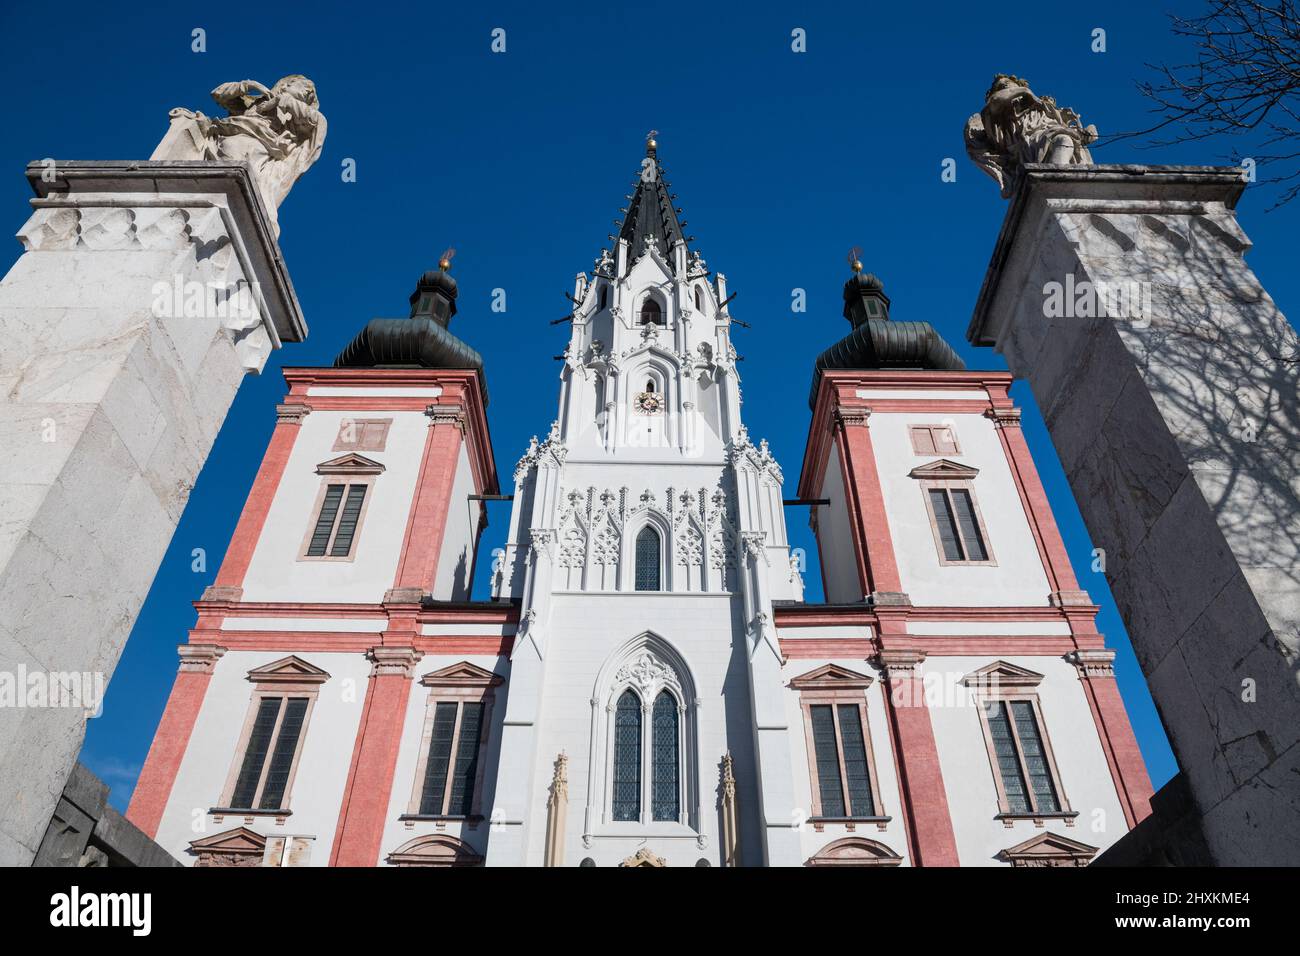 Basilica of the Birth of the Virgin Mary in Mariazell, Austria Stock Photo